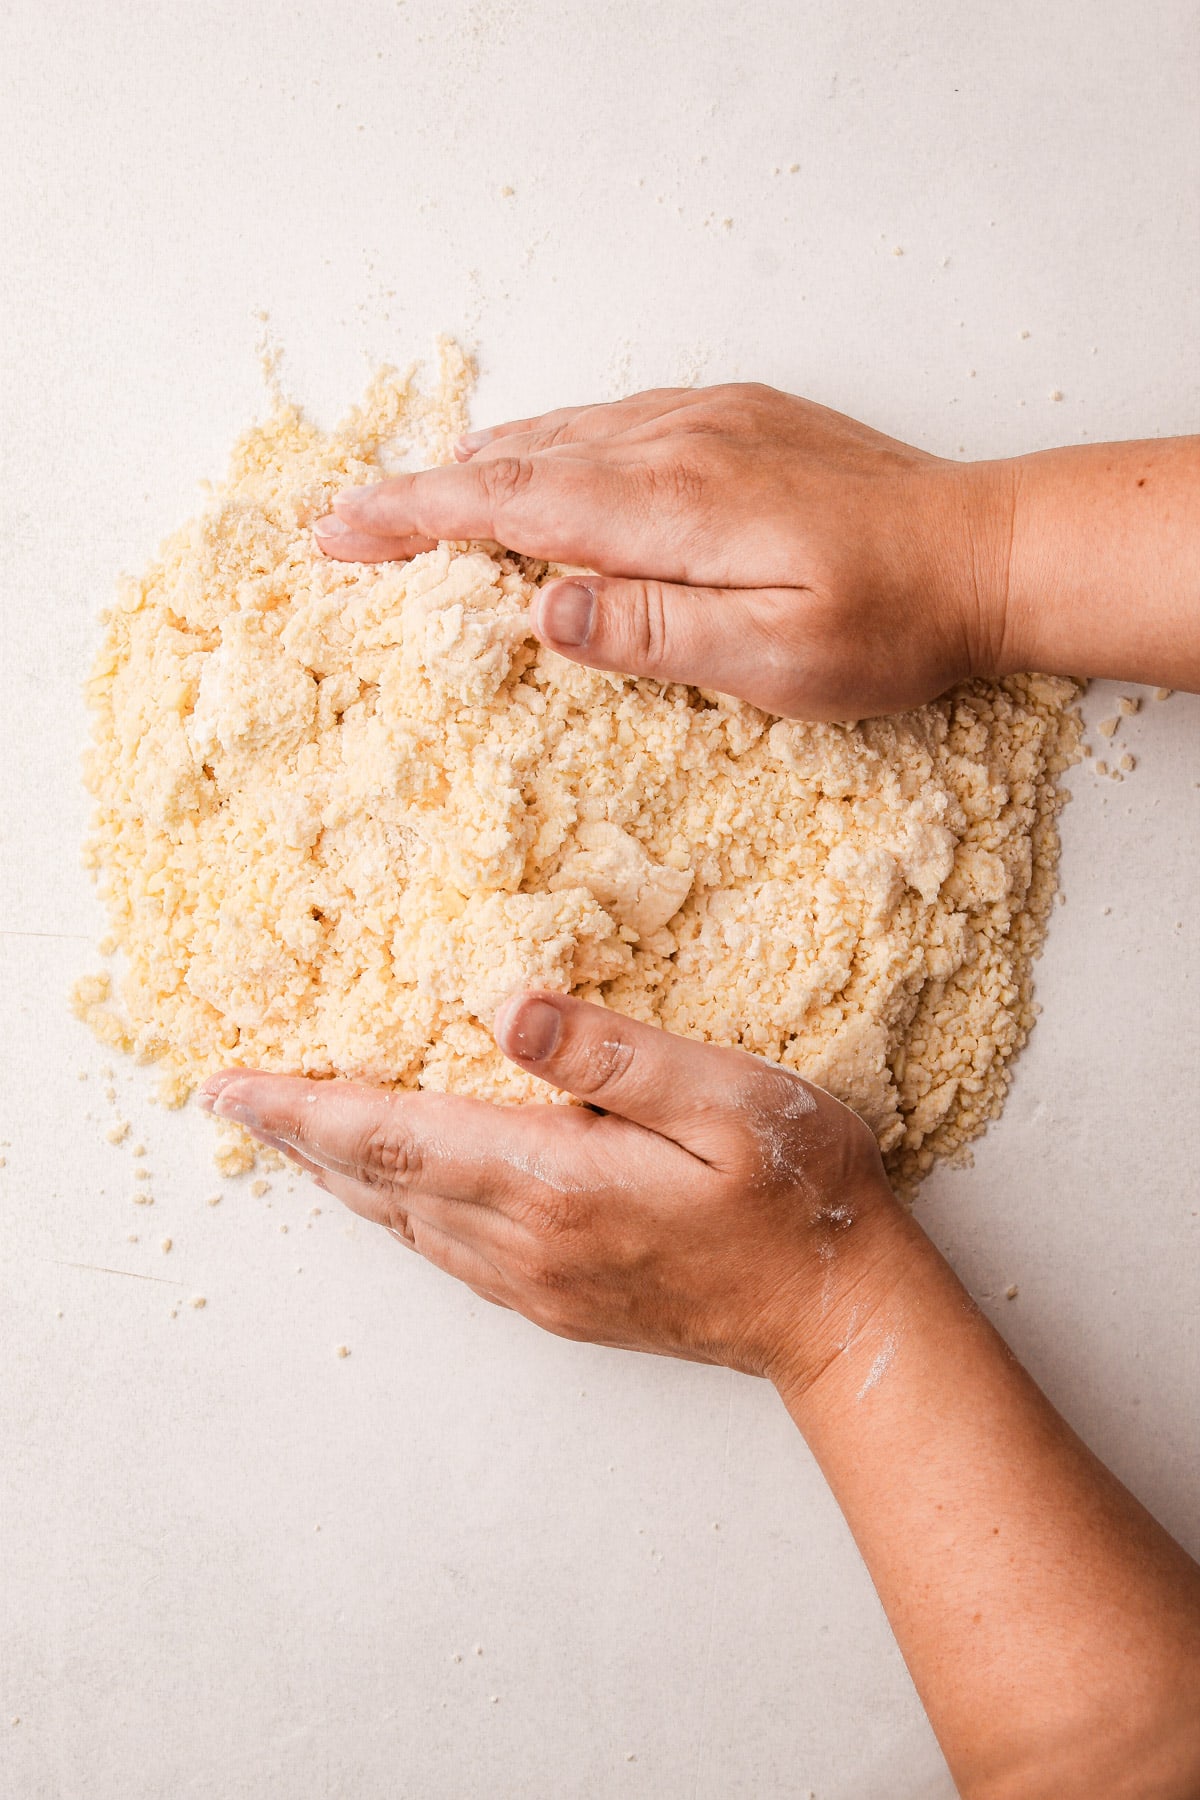 Two hands pushing together a crumbly pile of a flour and butter mixture on a counter surface